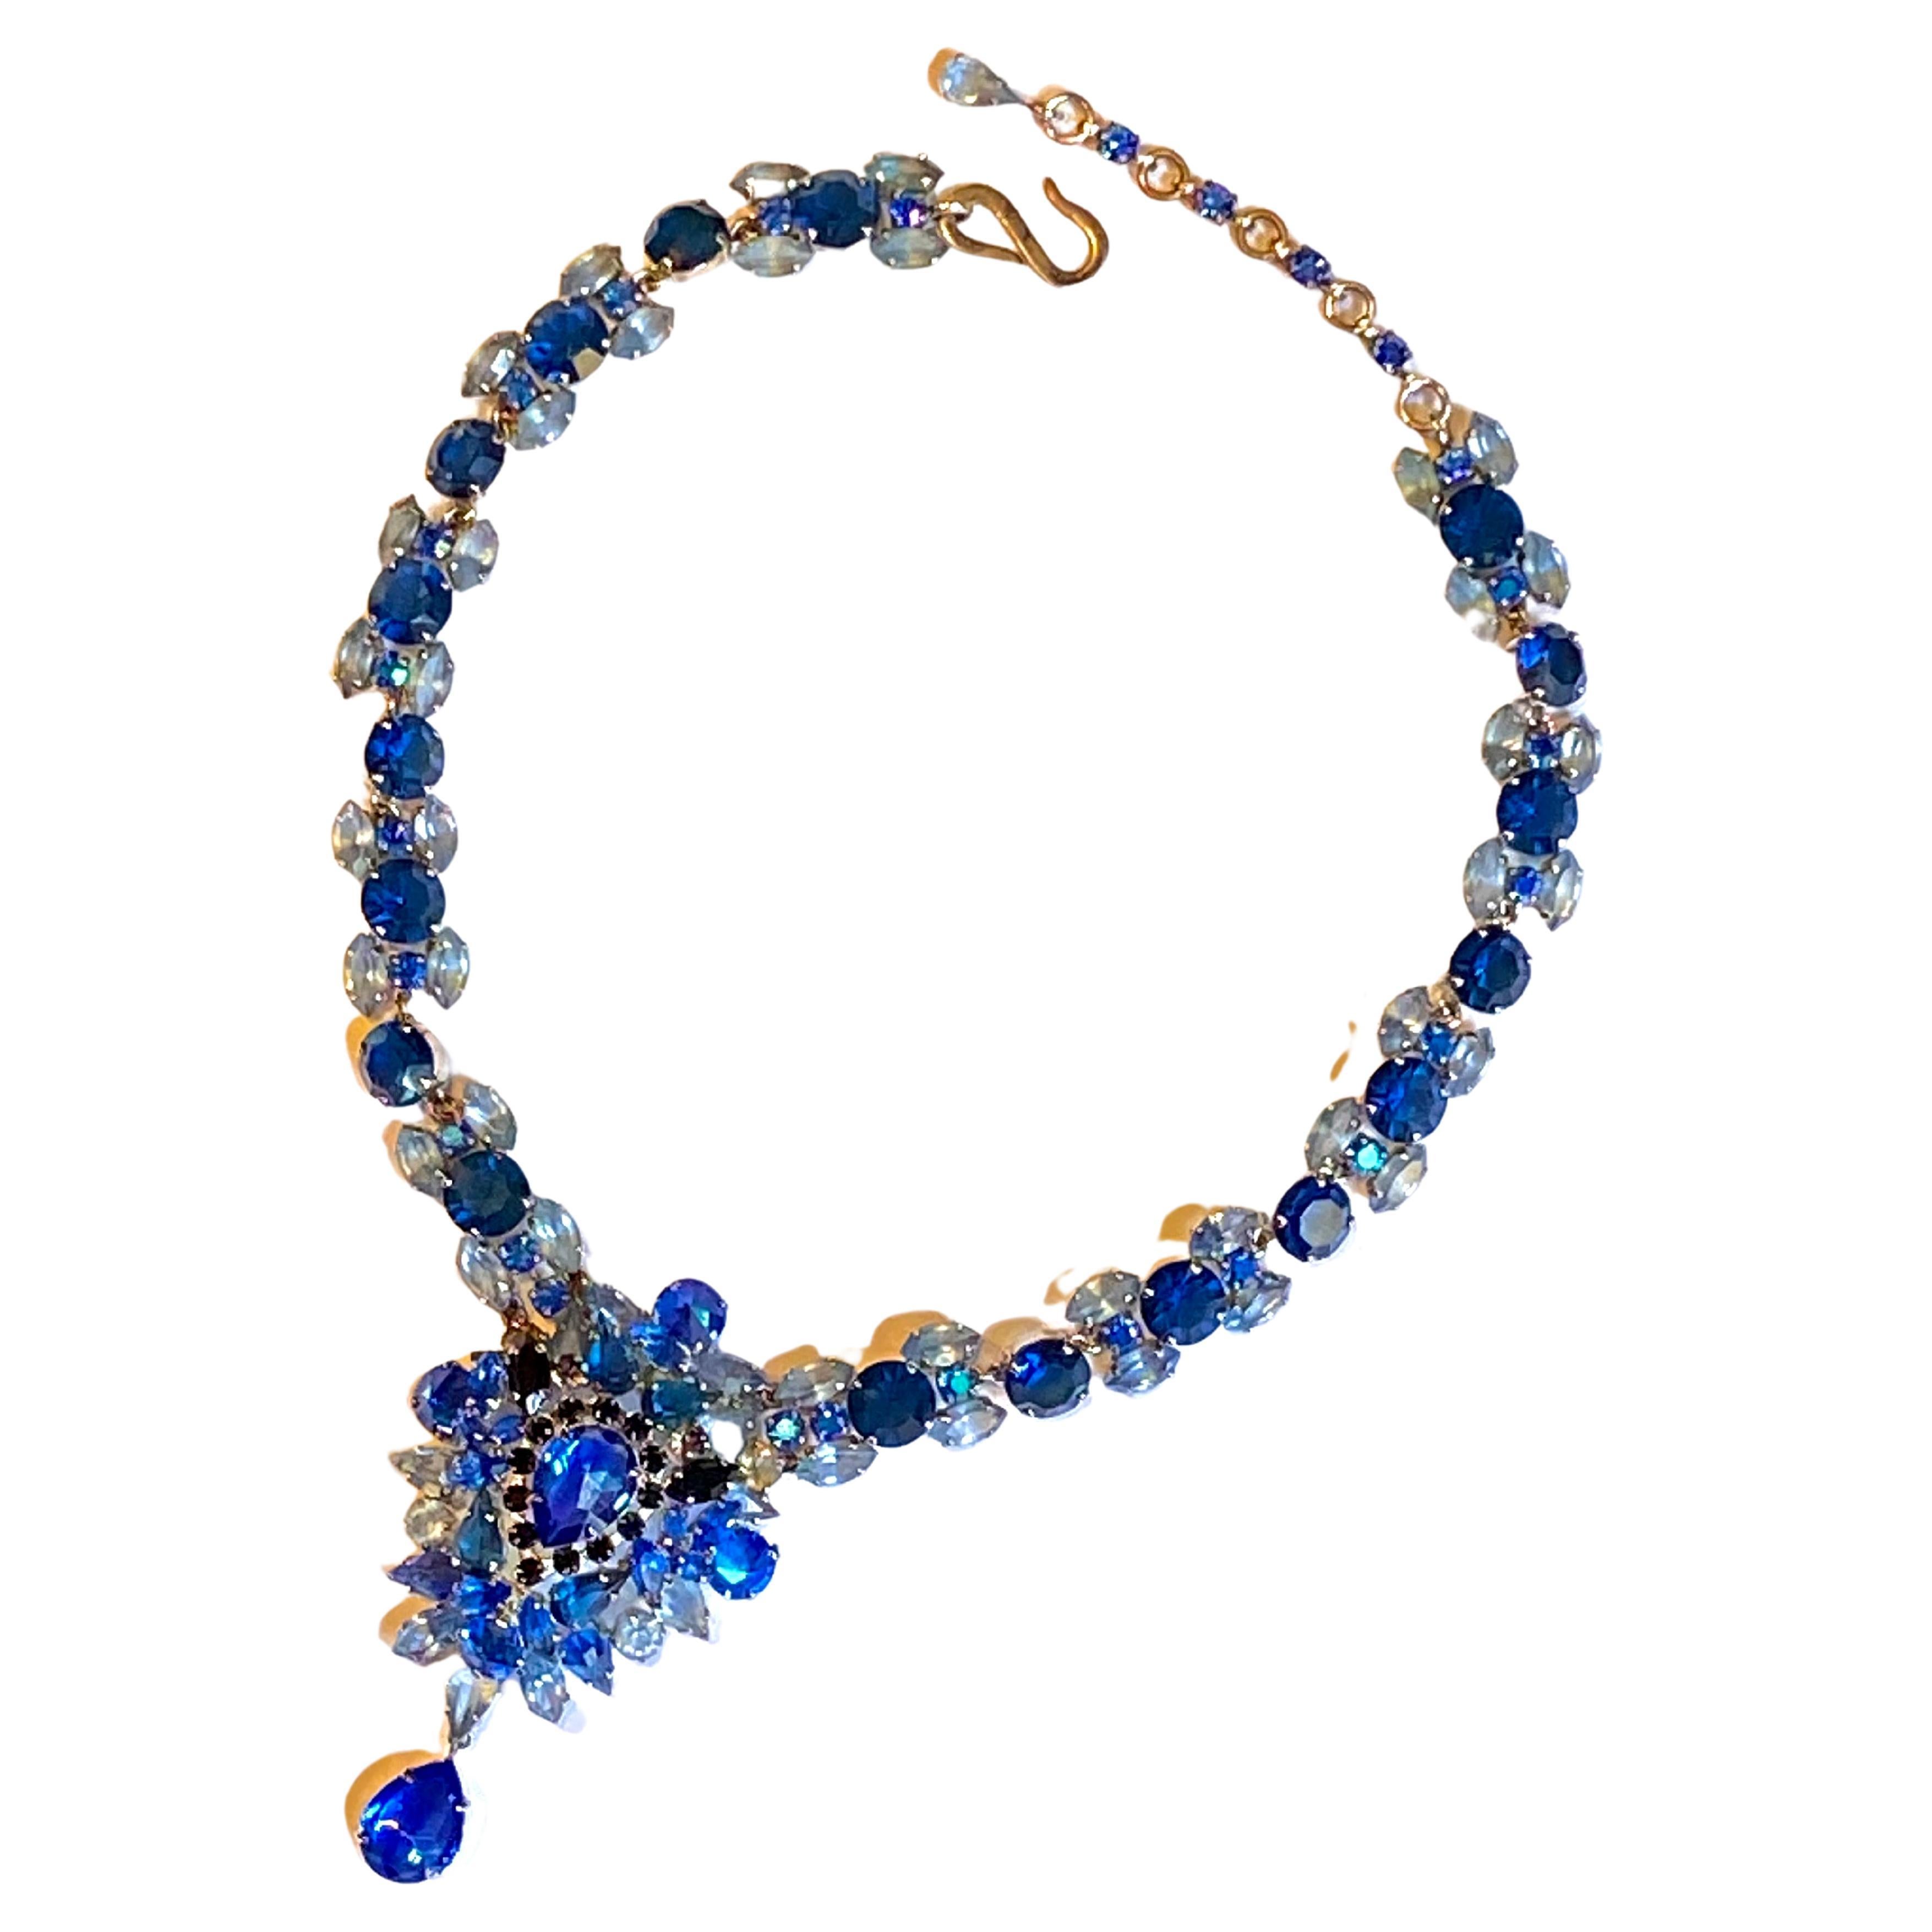 Christian Dior 1959 Shades of Blue Rhinestone Necklace by Henkel & Grosse'